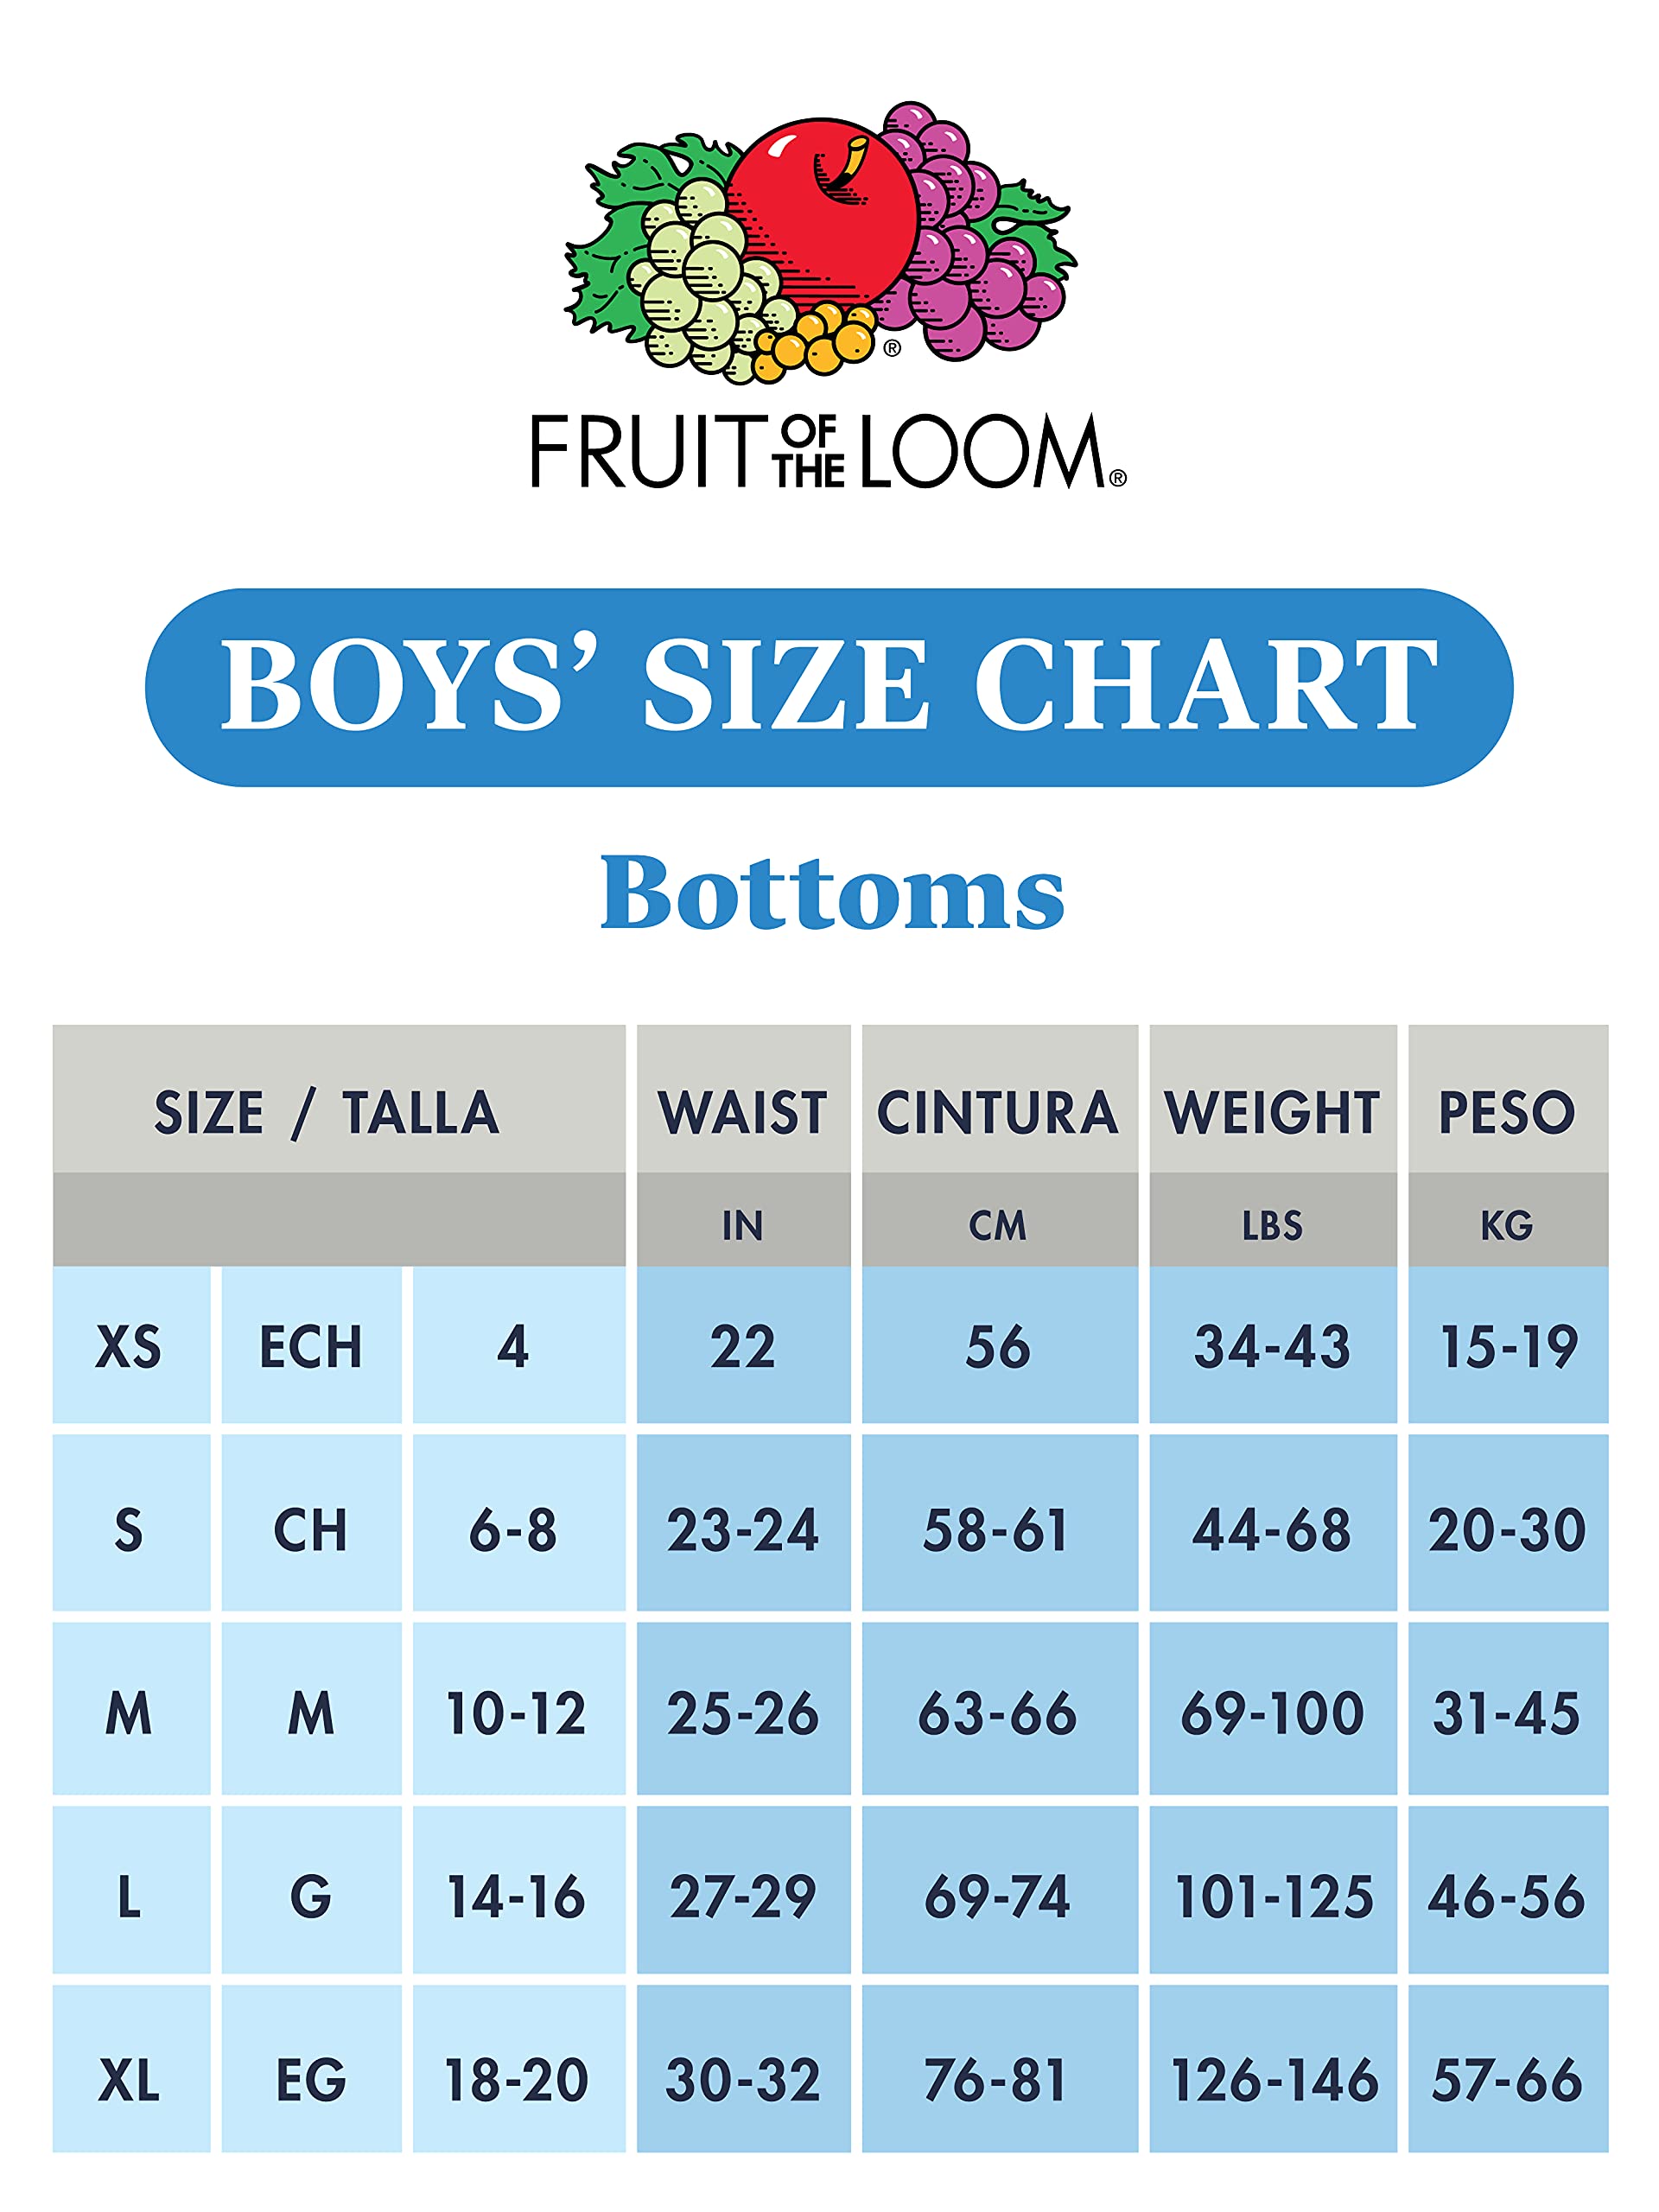 Fruit of the Loom Boys' Boxer Shorts, Woven - 7 Pack - Assorted, Medium